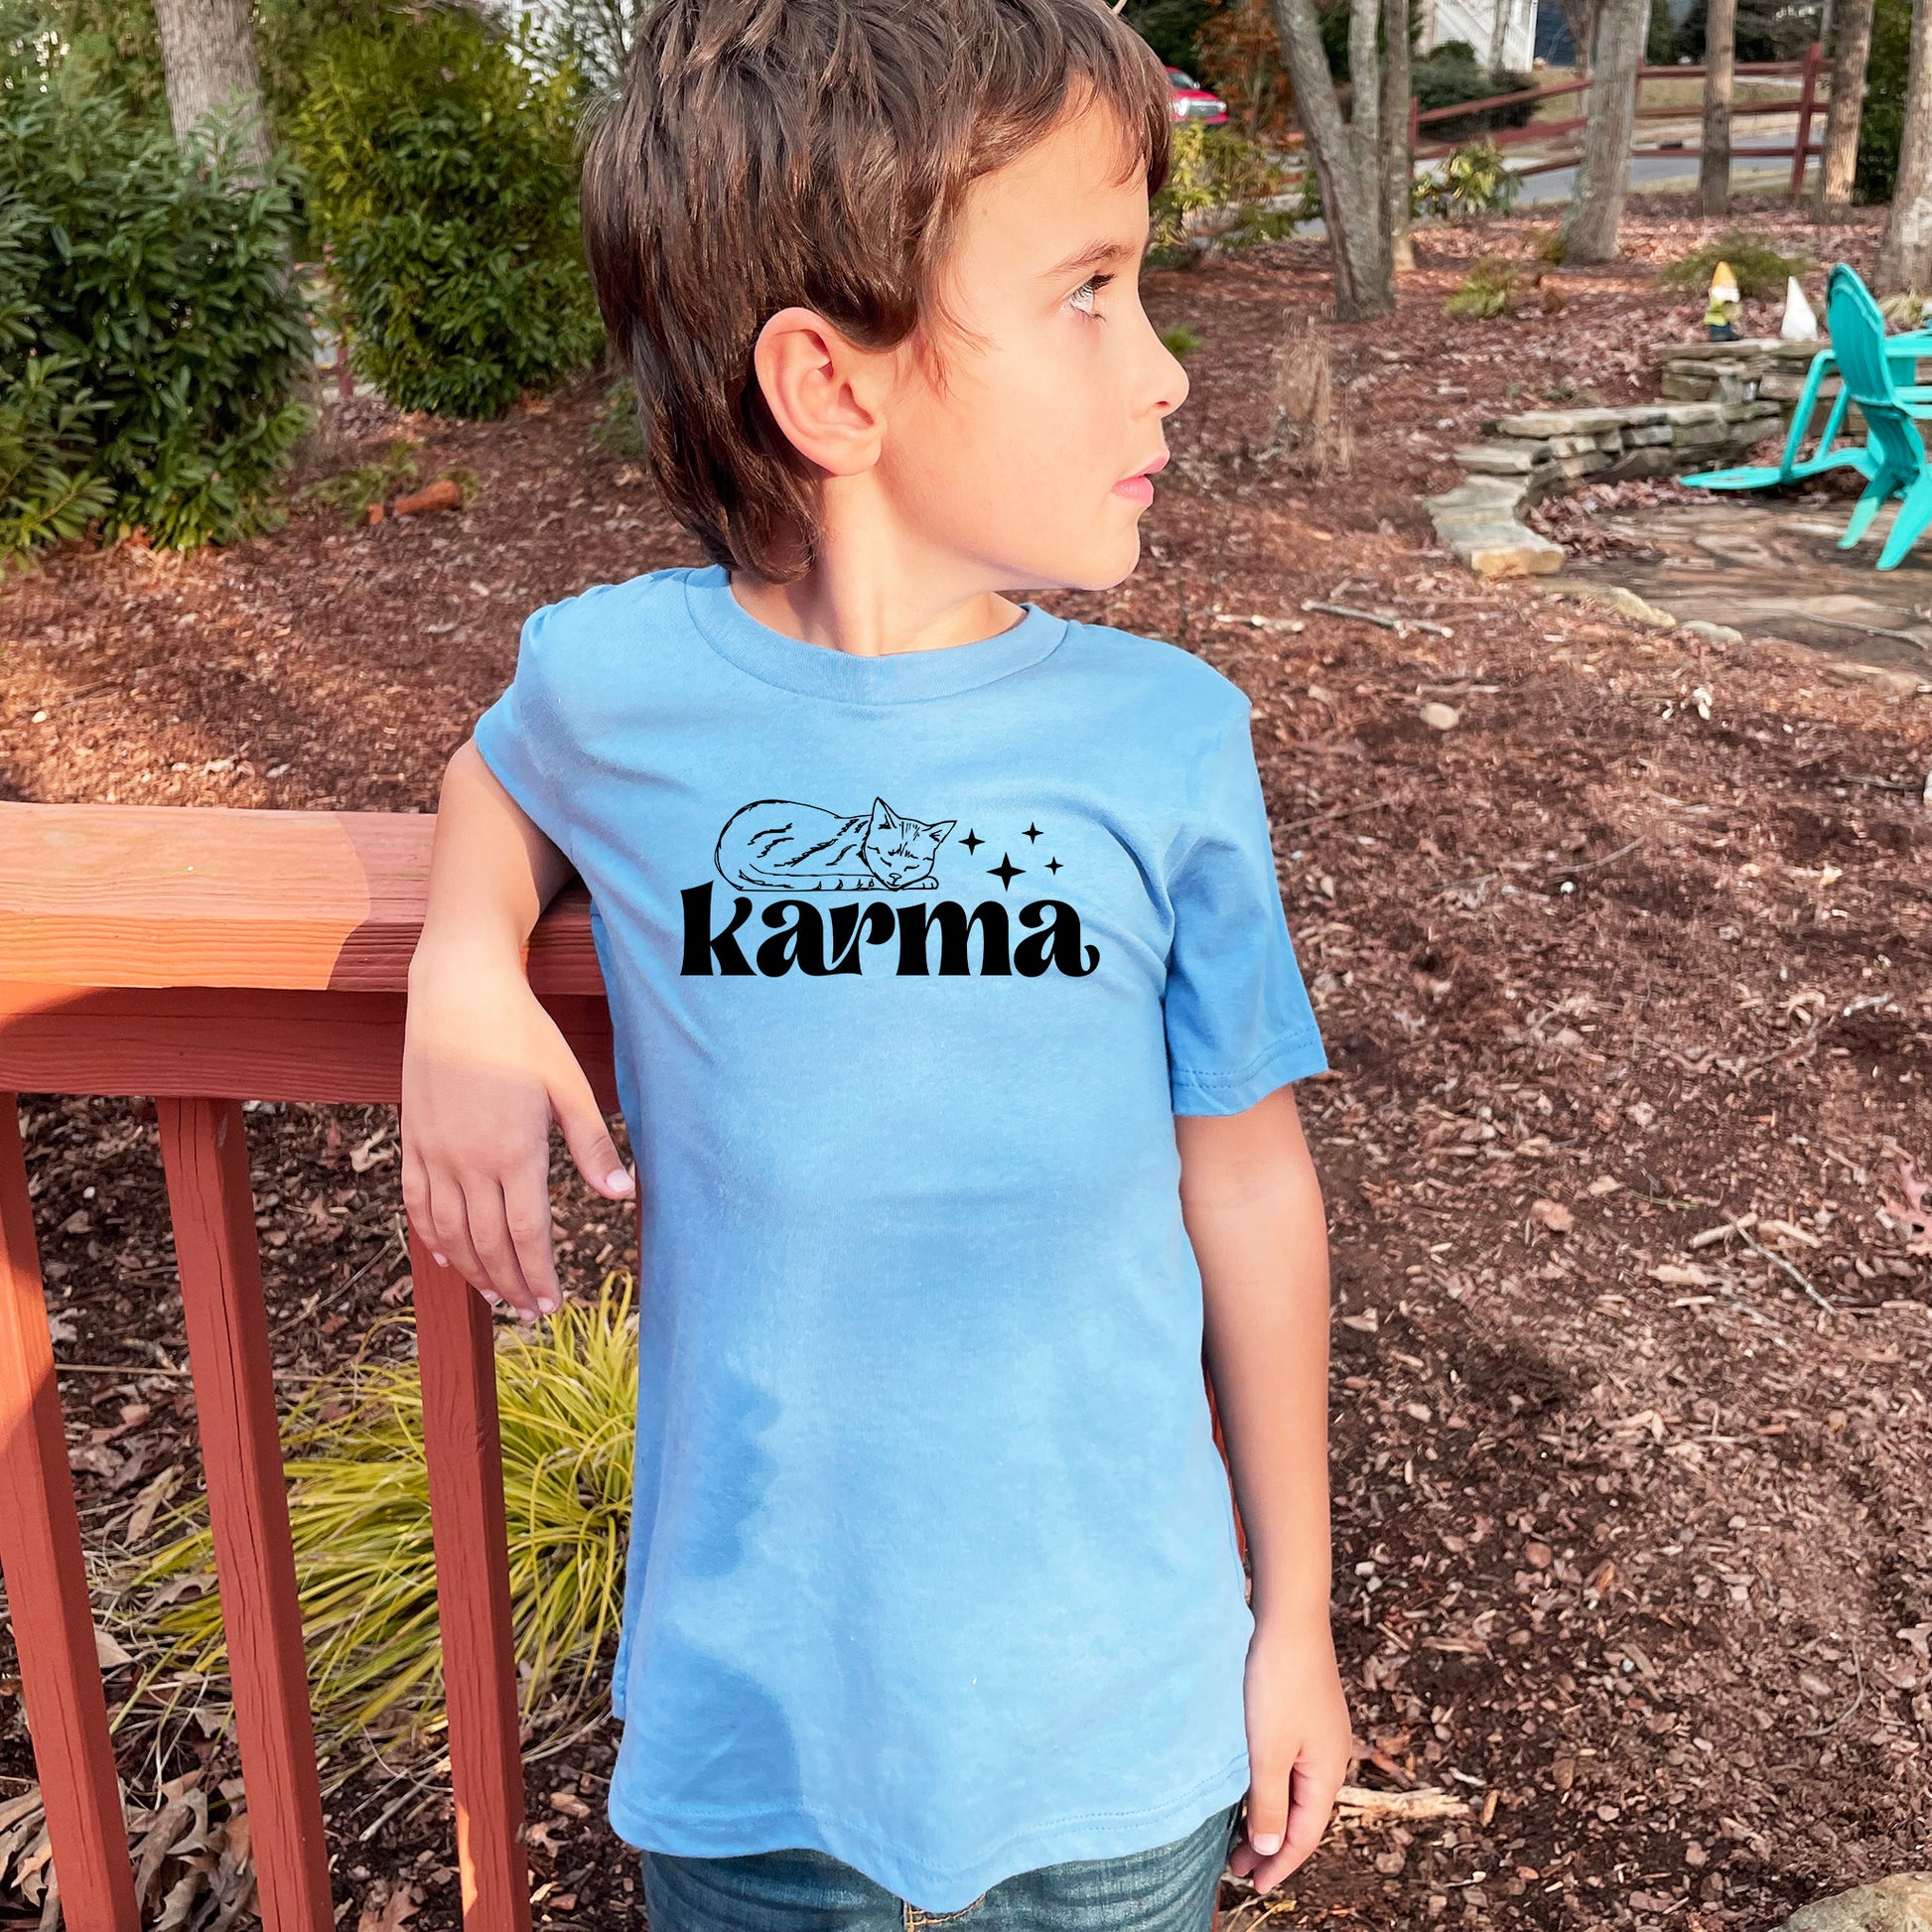 a young boy wearing a blue shirt with the word karma printed on it